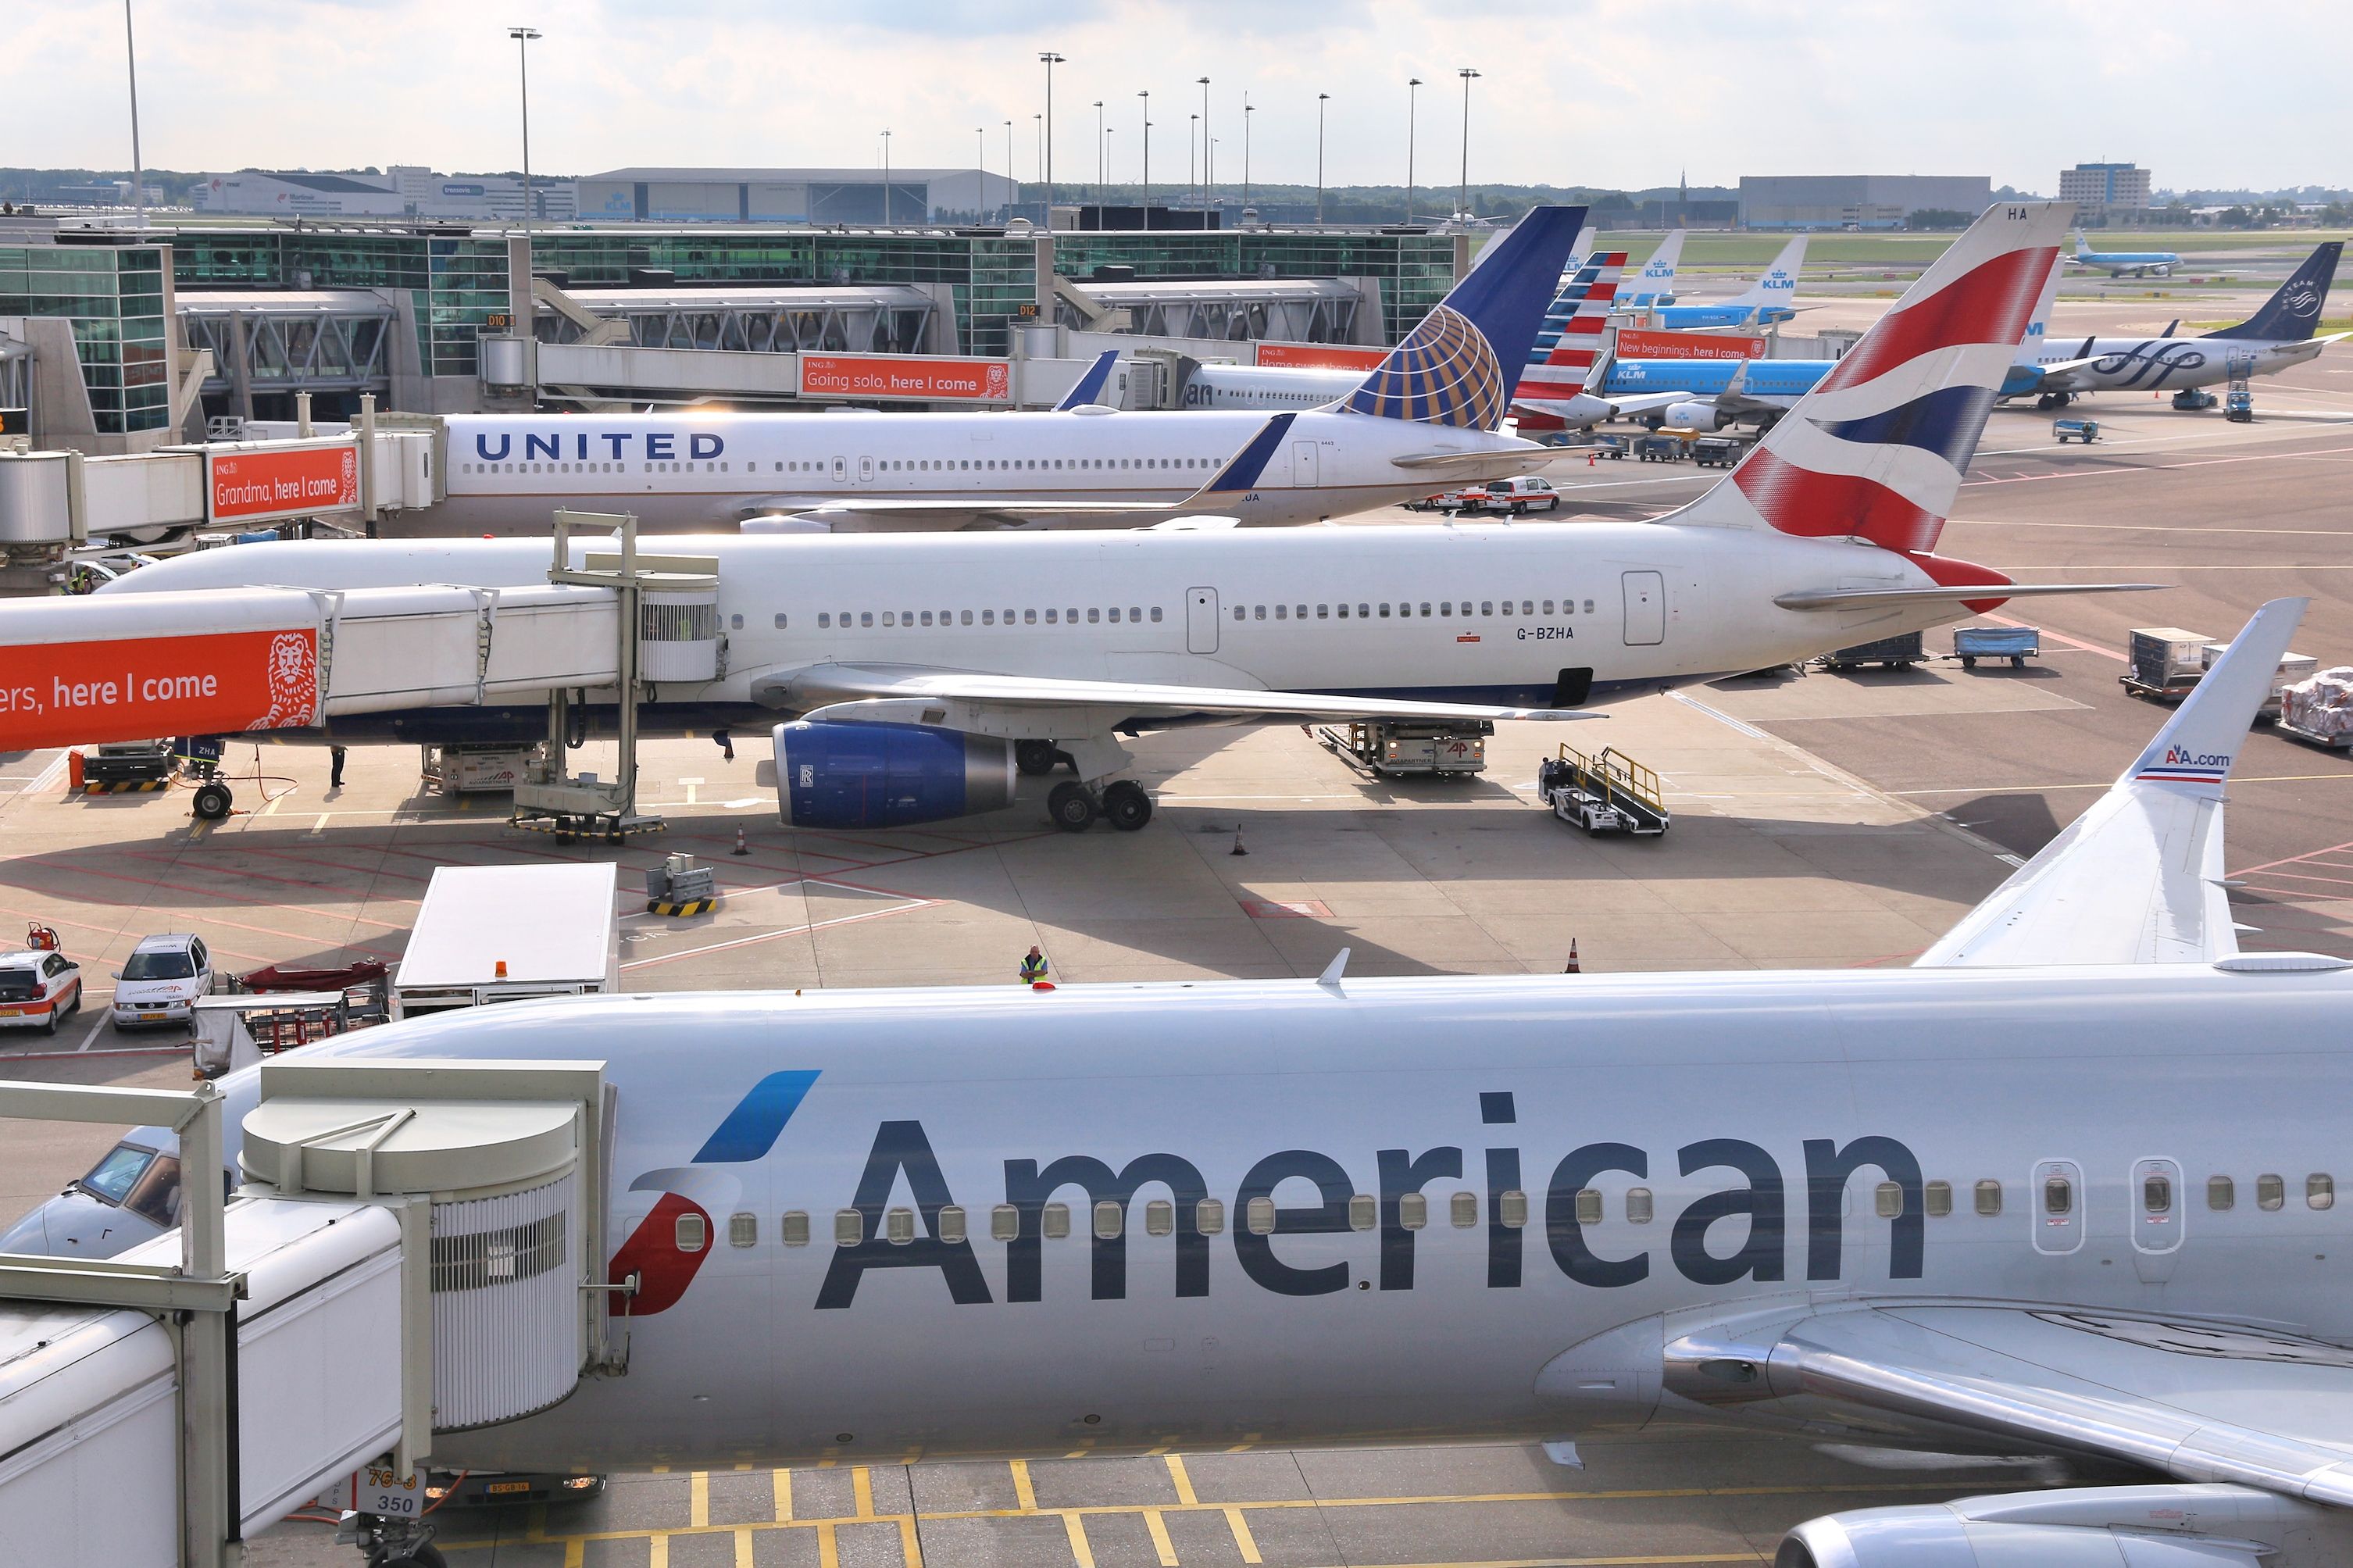 British Airways, American Airlines, And United Airlines Aircraft parked at the gate.